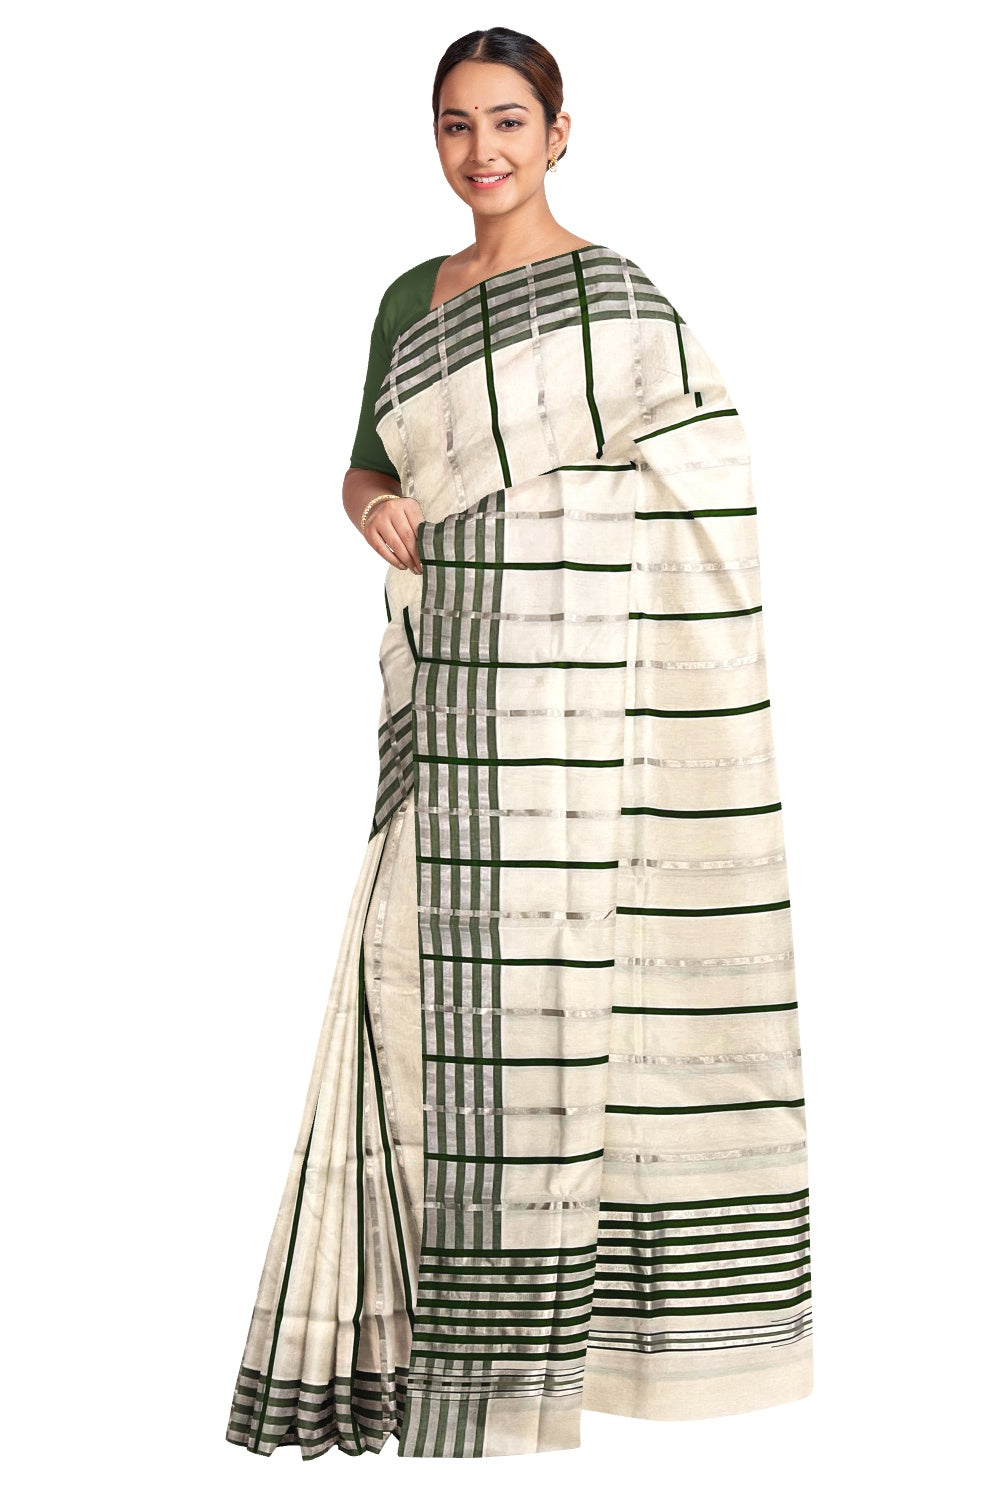 Southloom Premium Handloom Saree with Silver Kasavu and Green Lines Across Body and Lines Design Pallu